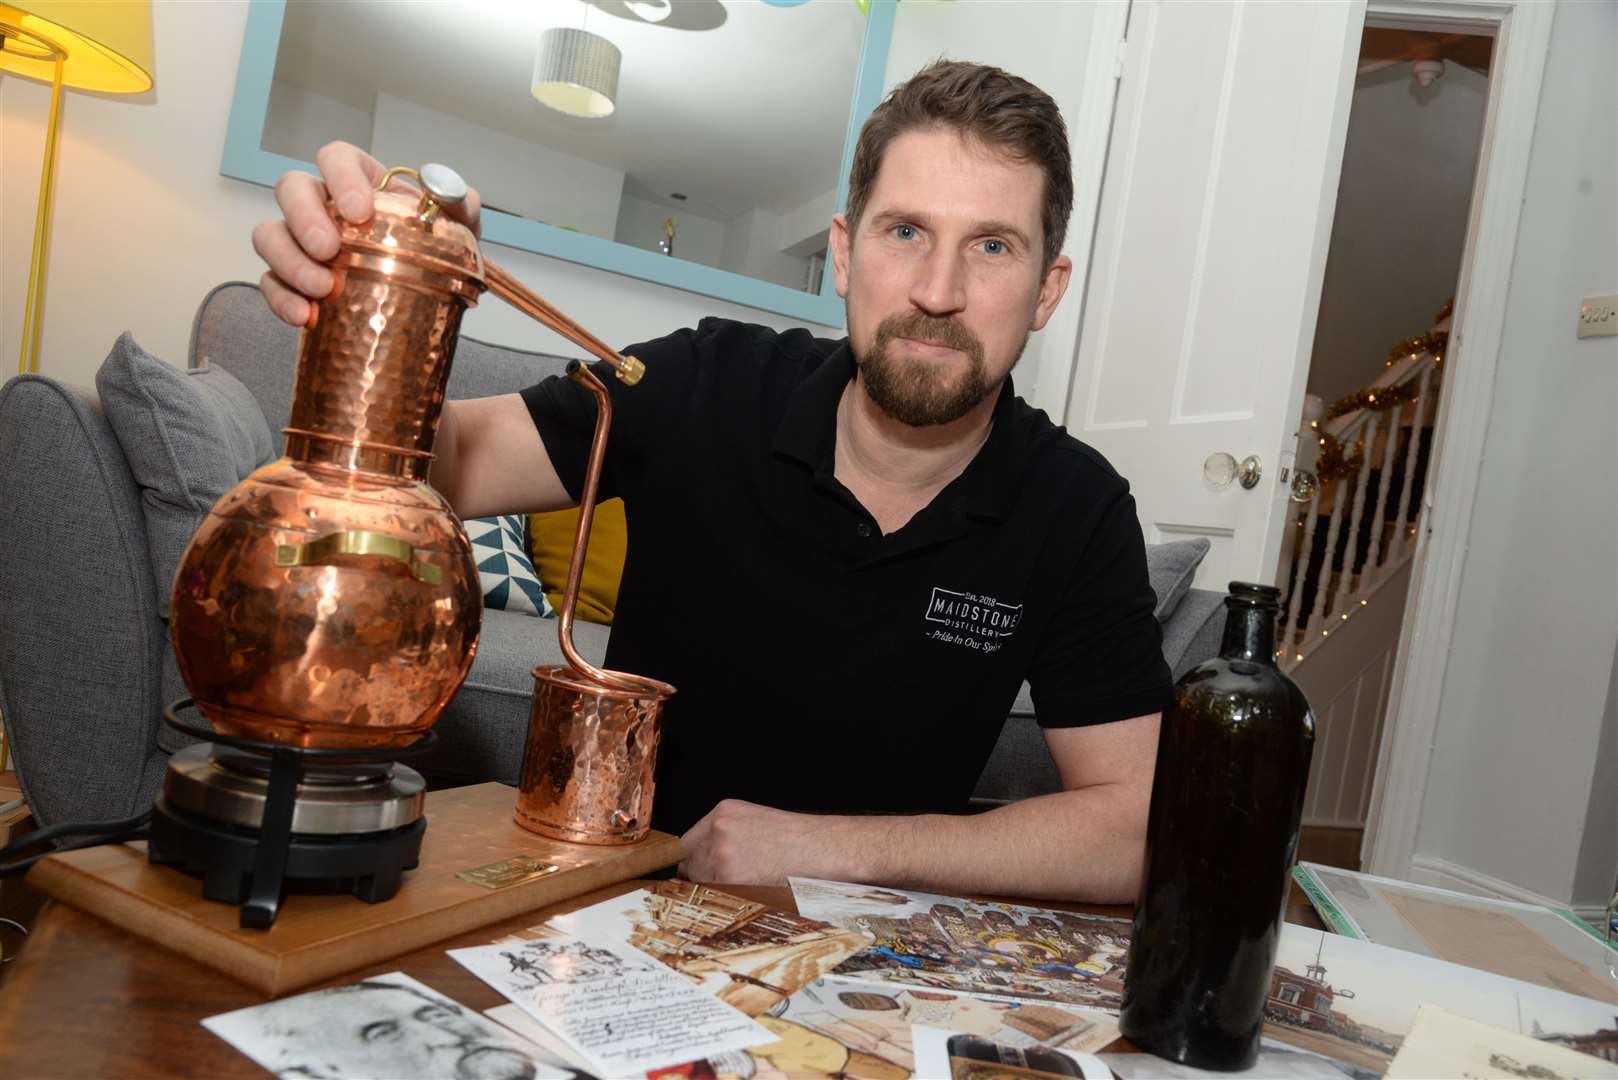 Darren Graves who has opened a distillery in Maidstone